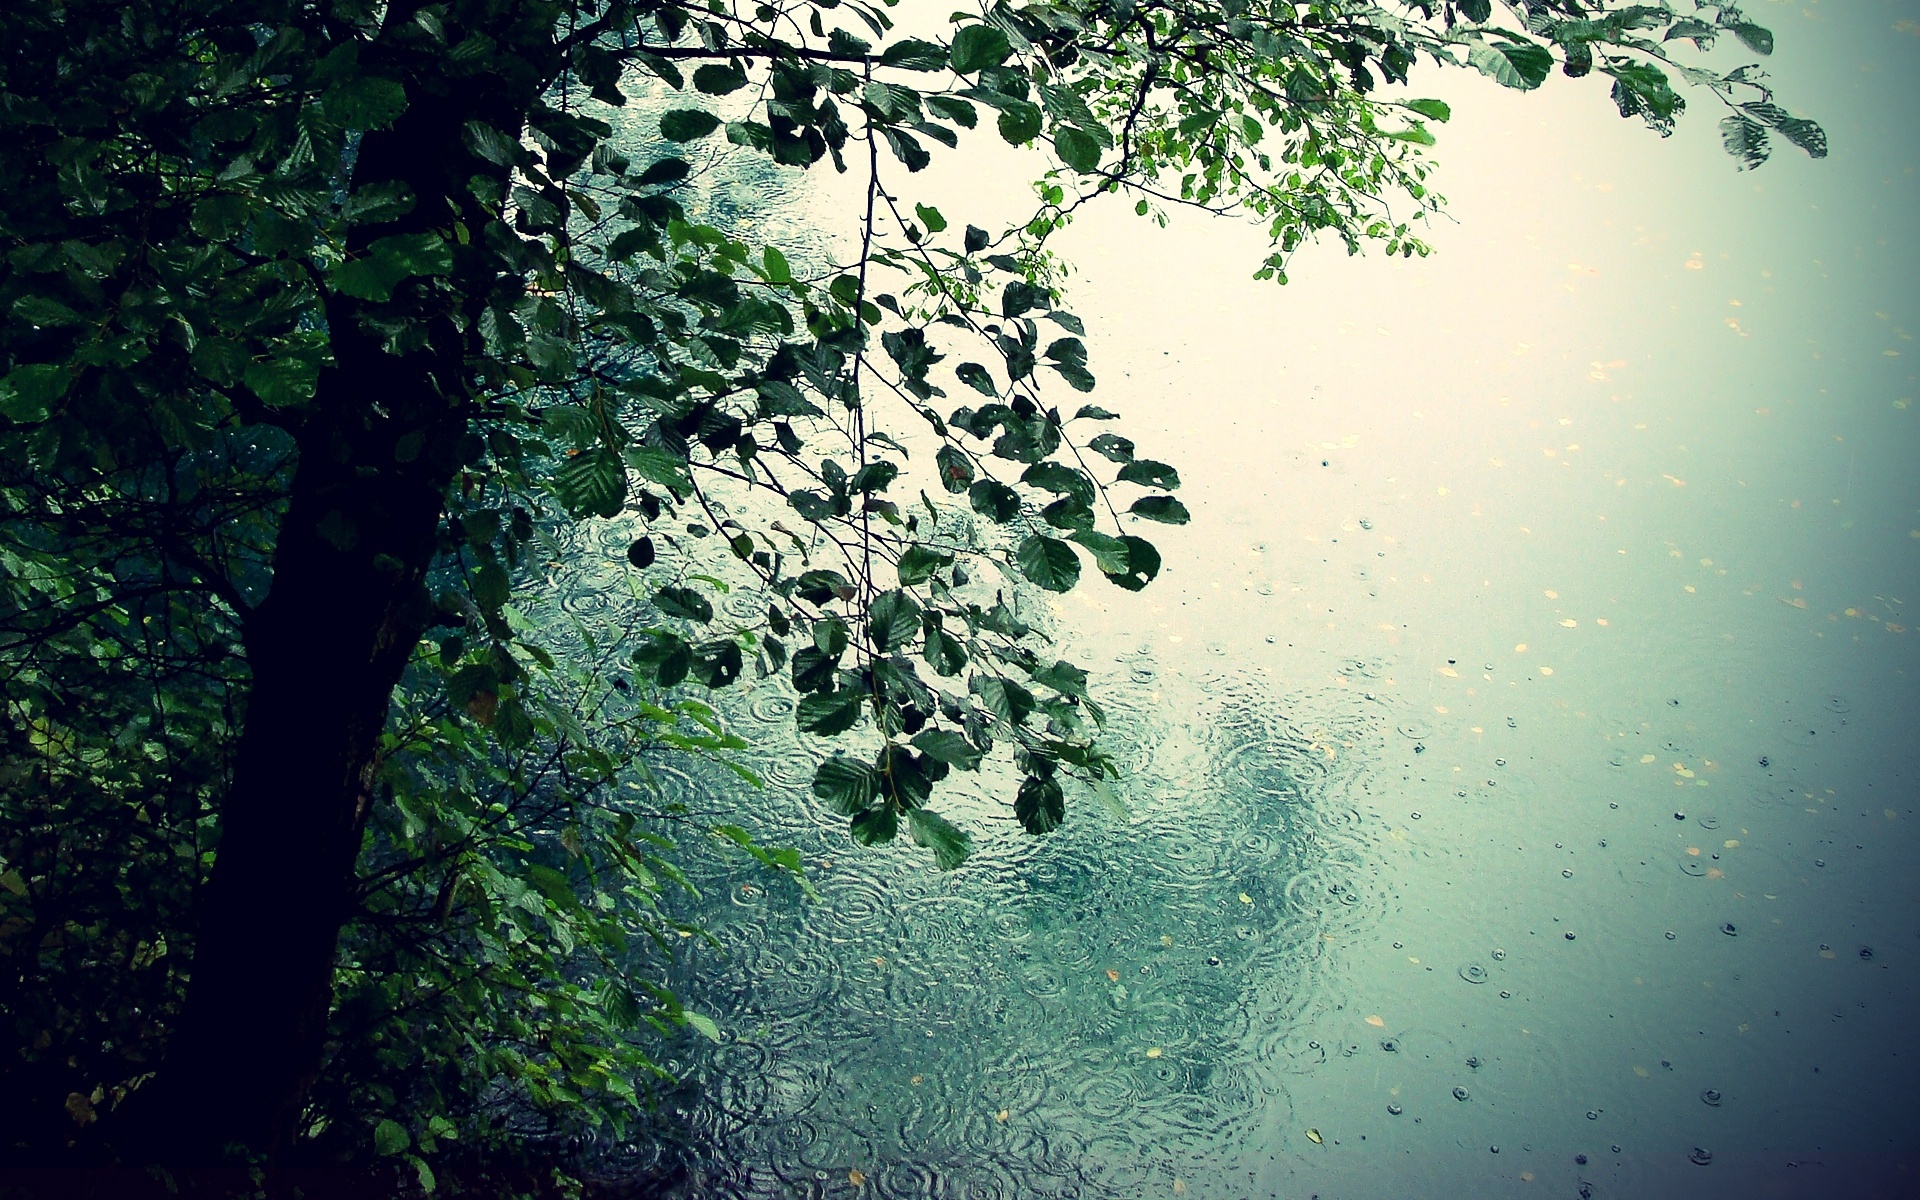  Rain  Wallpapers High Quality Download Free 